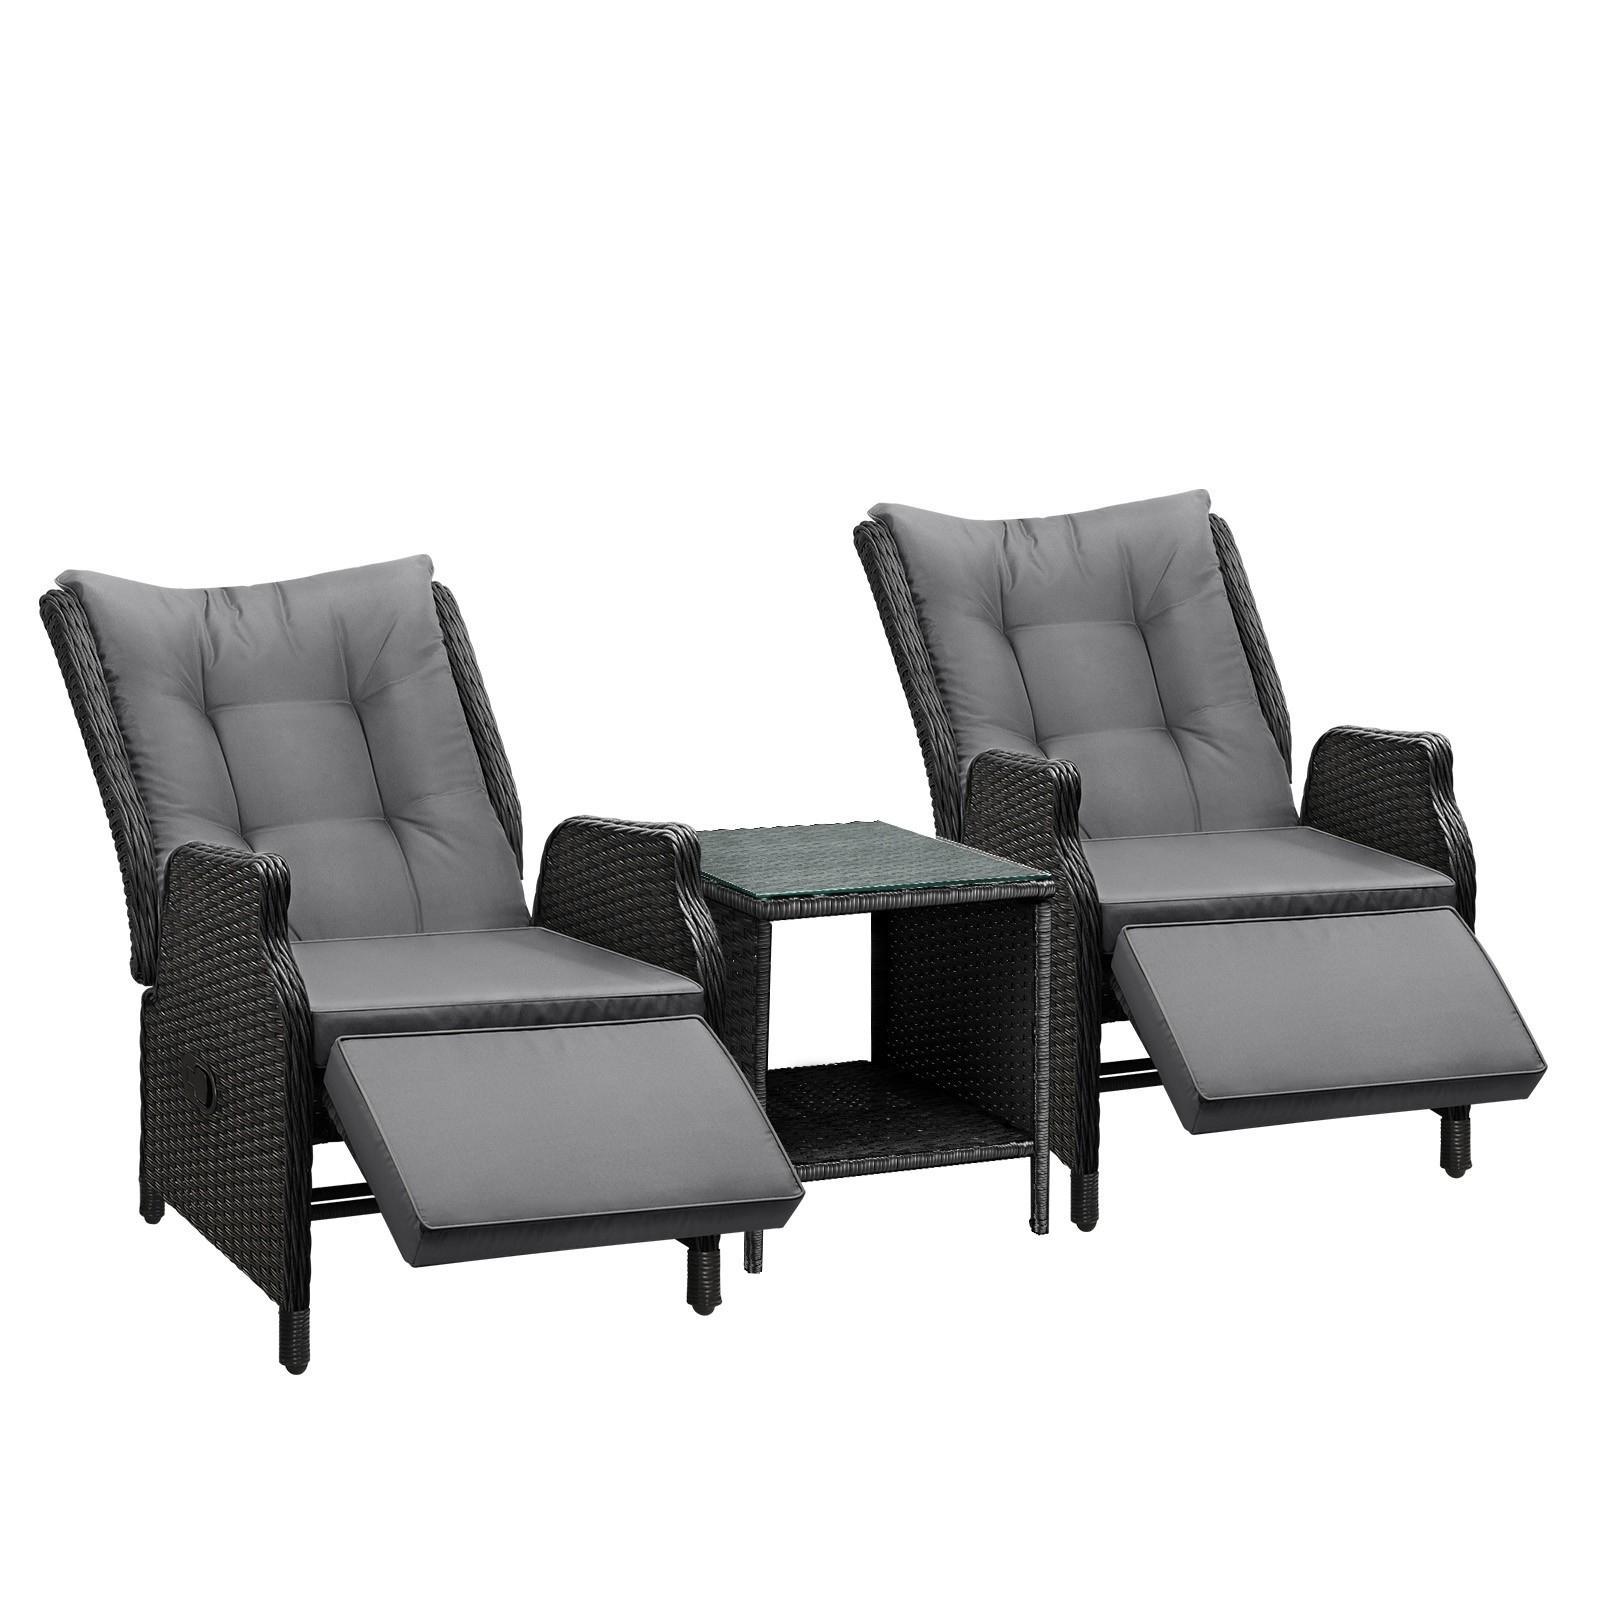 Livsip Recliner Chairs Sun lounger Table Set of 3